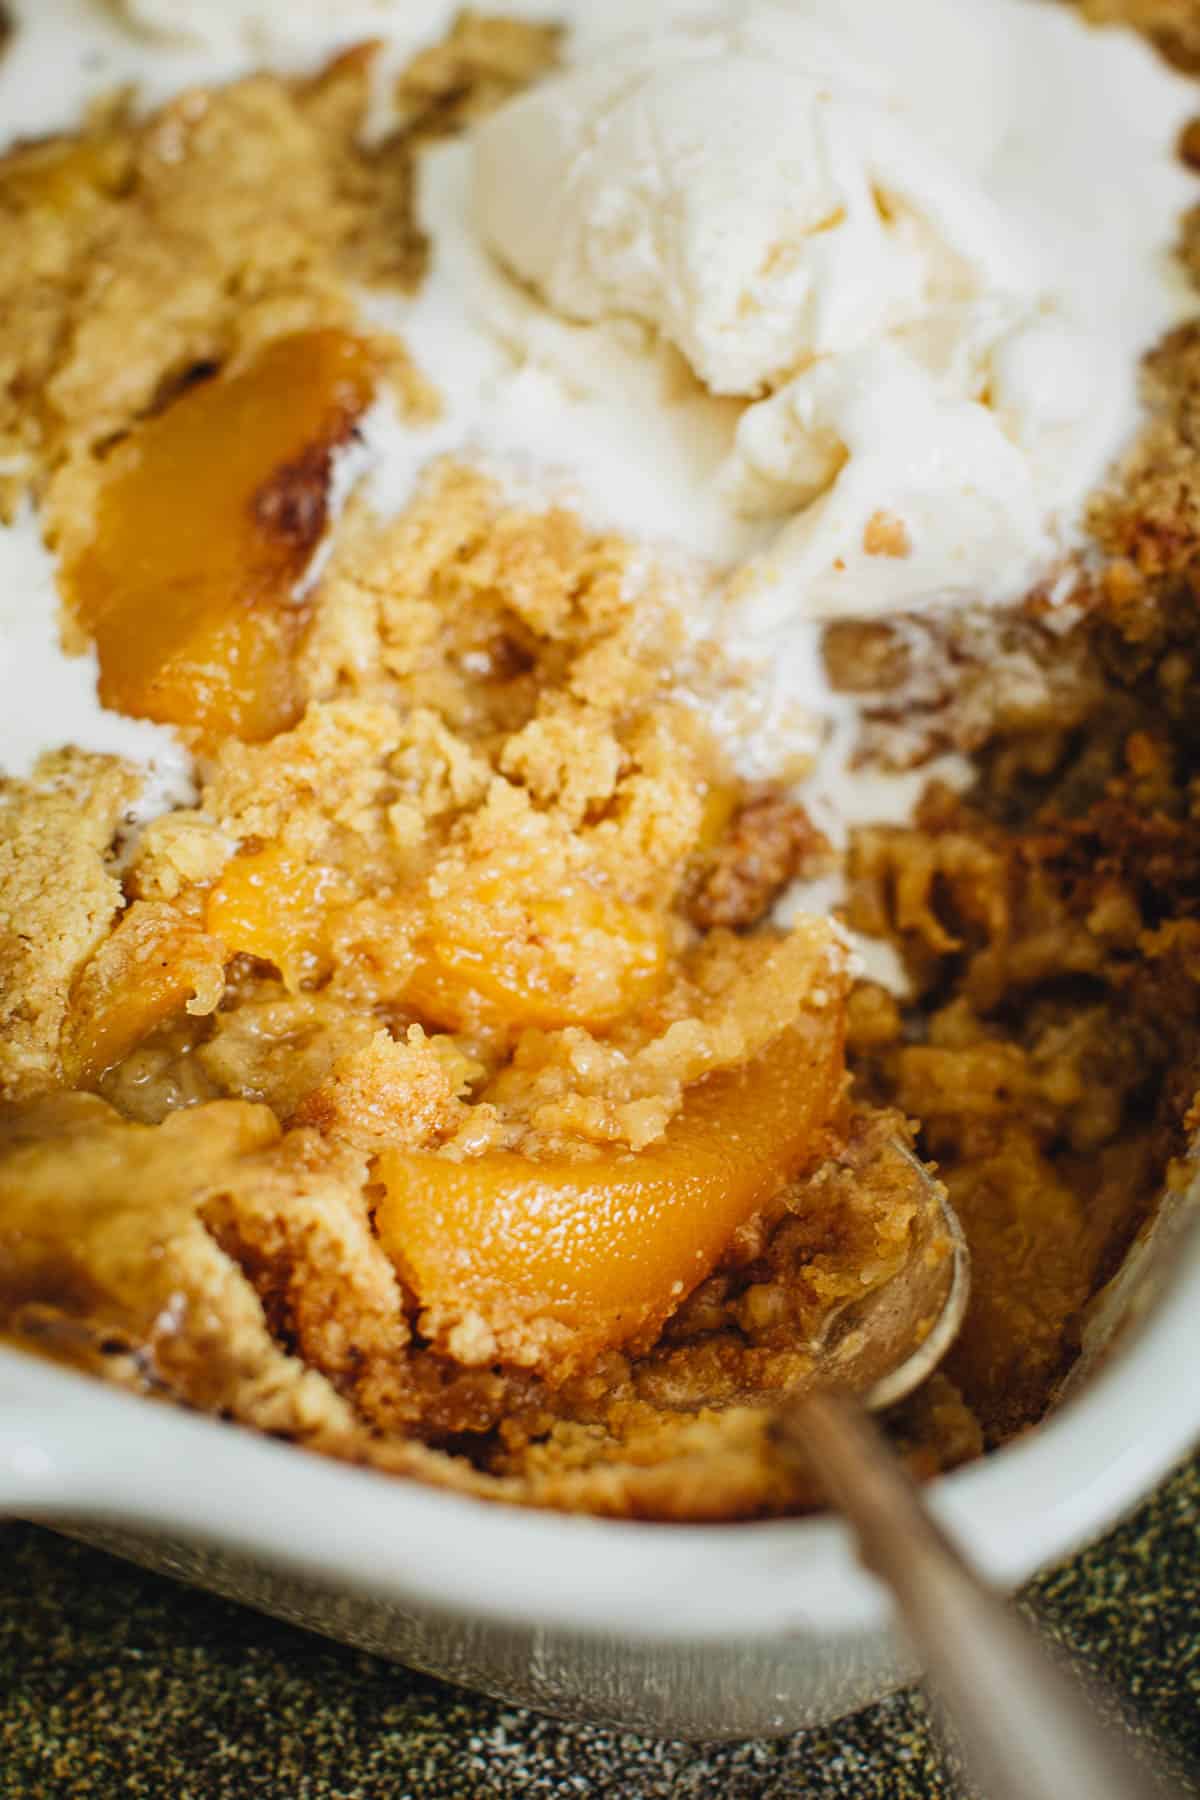 Peach cobbler topped with ice cream.